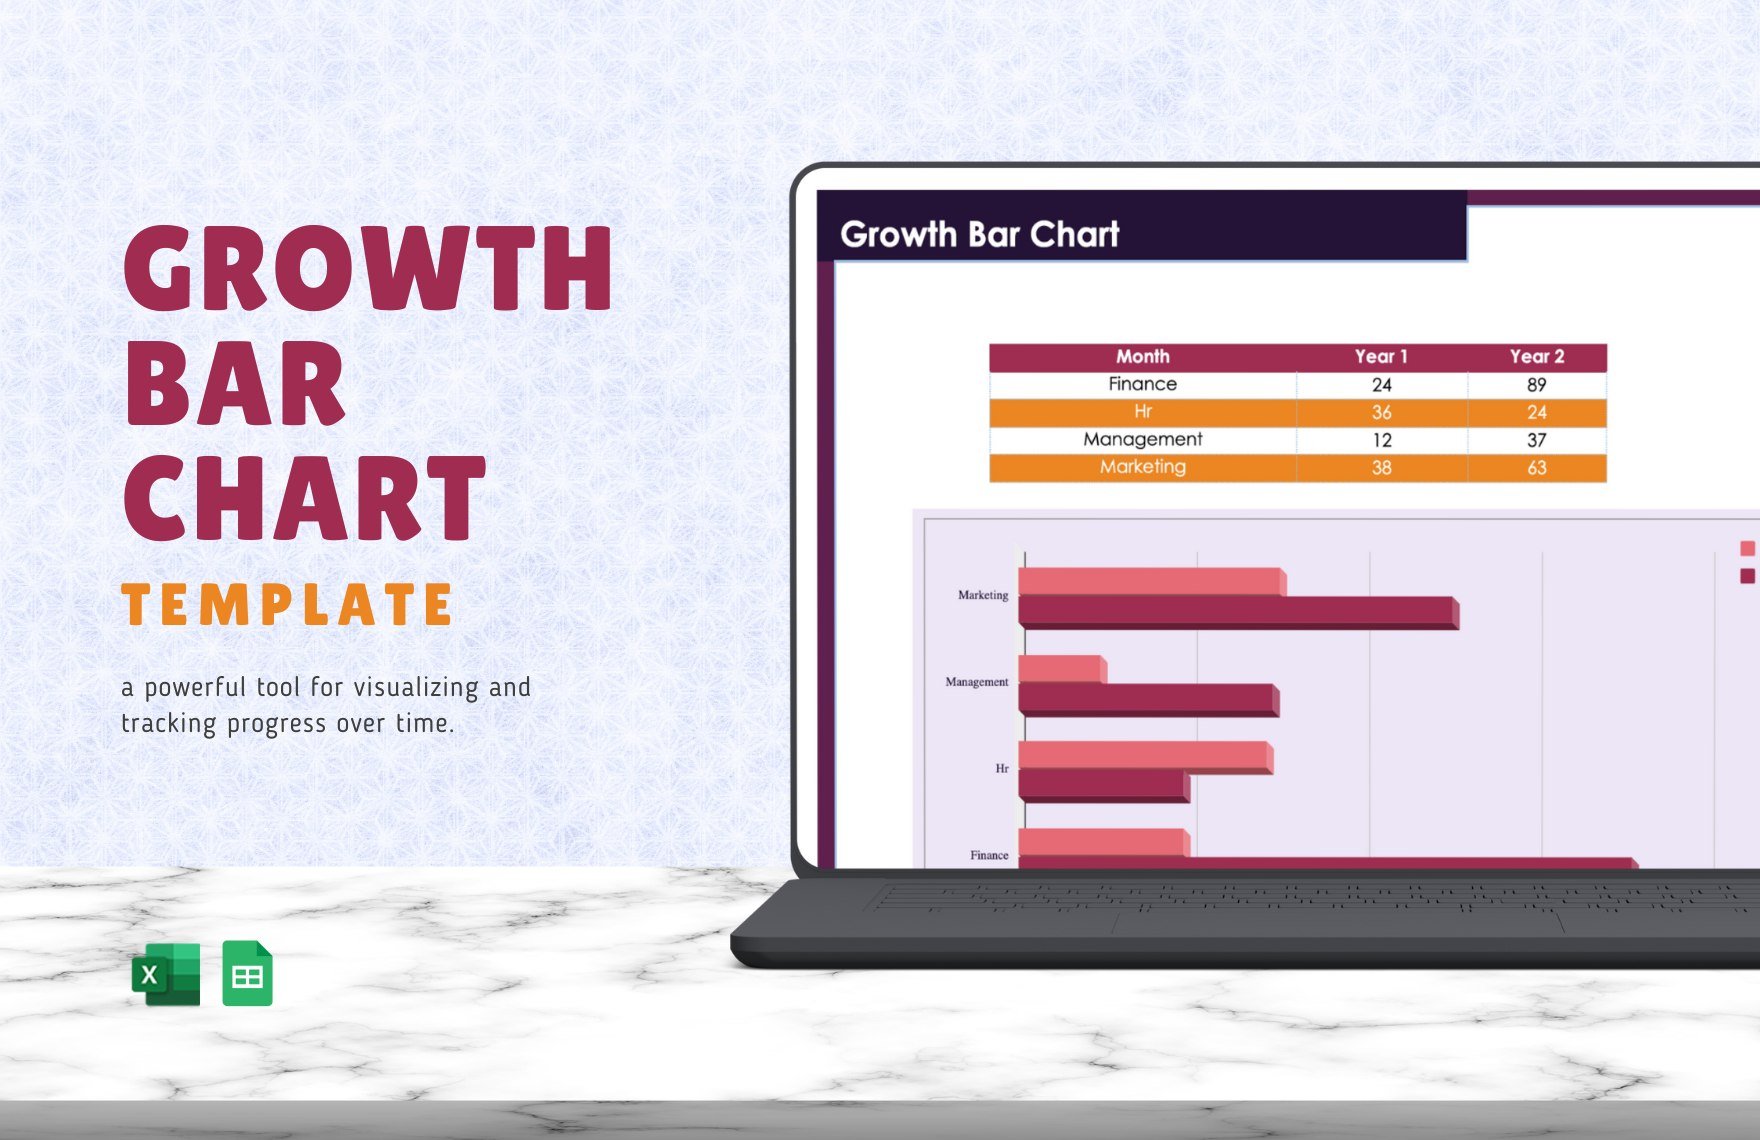 Growth Bar Chart Template in Excel, Google Sheets